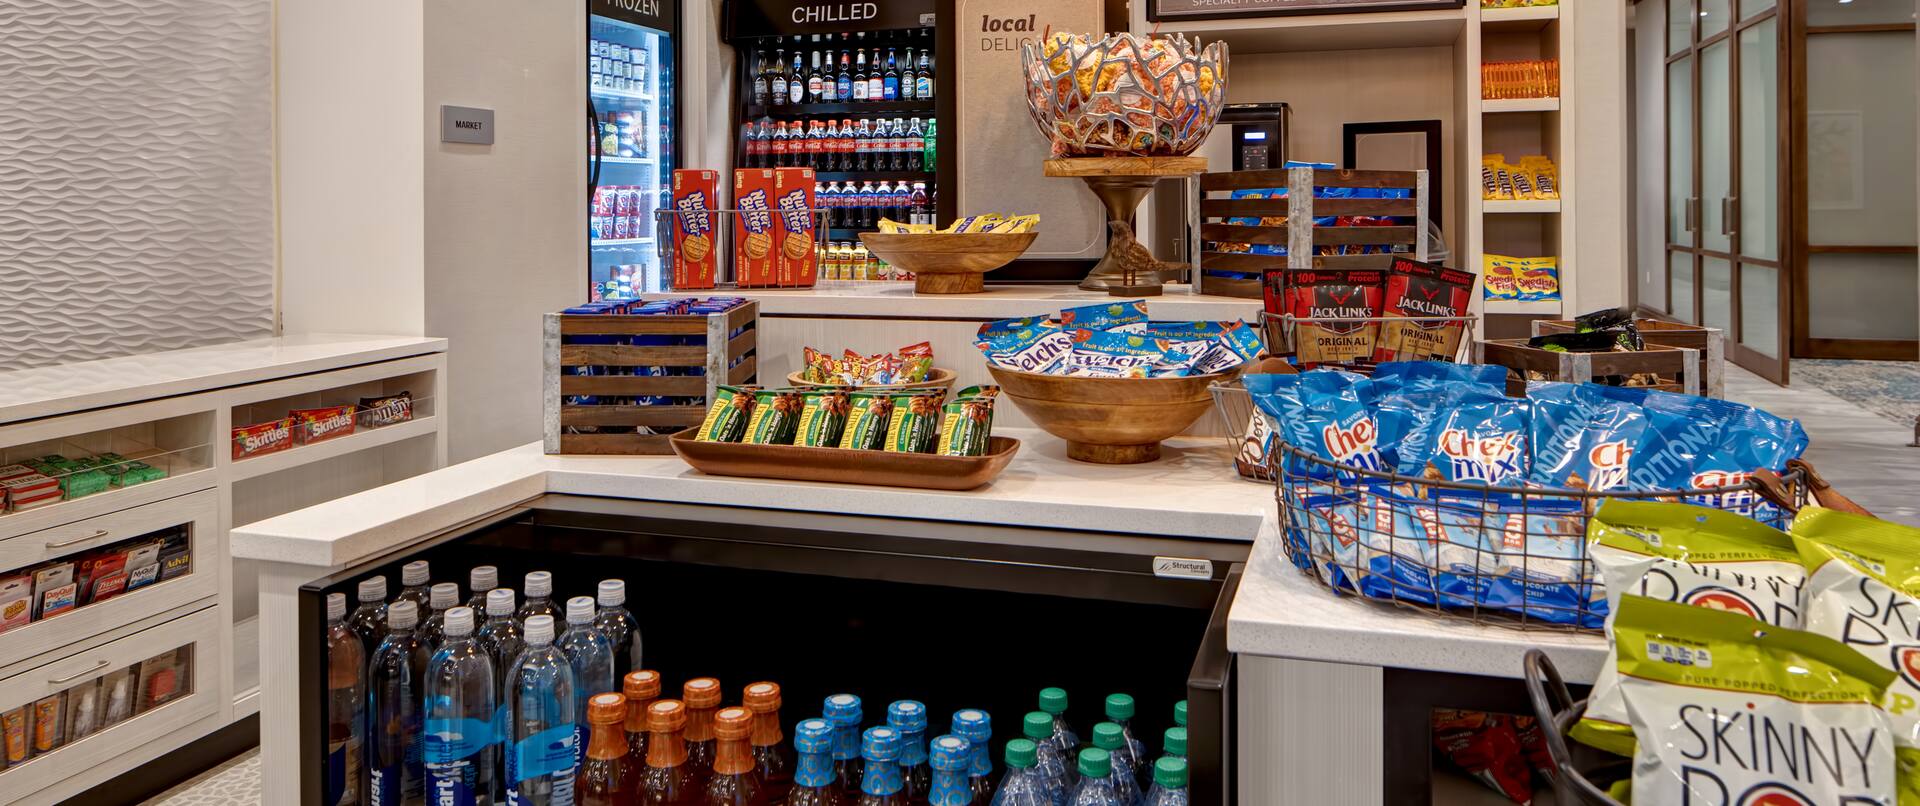 snack shop showing various drinks and snacks